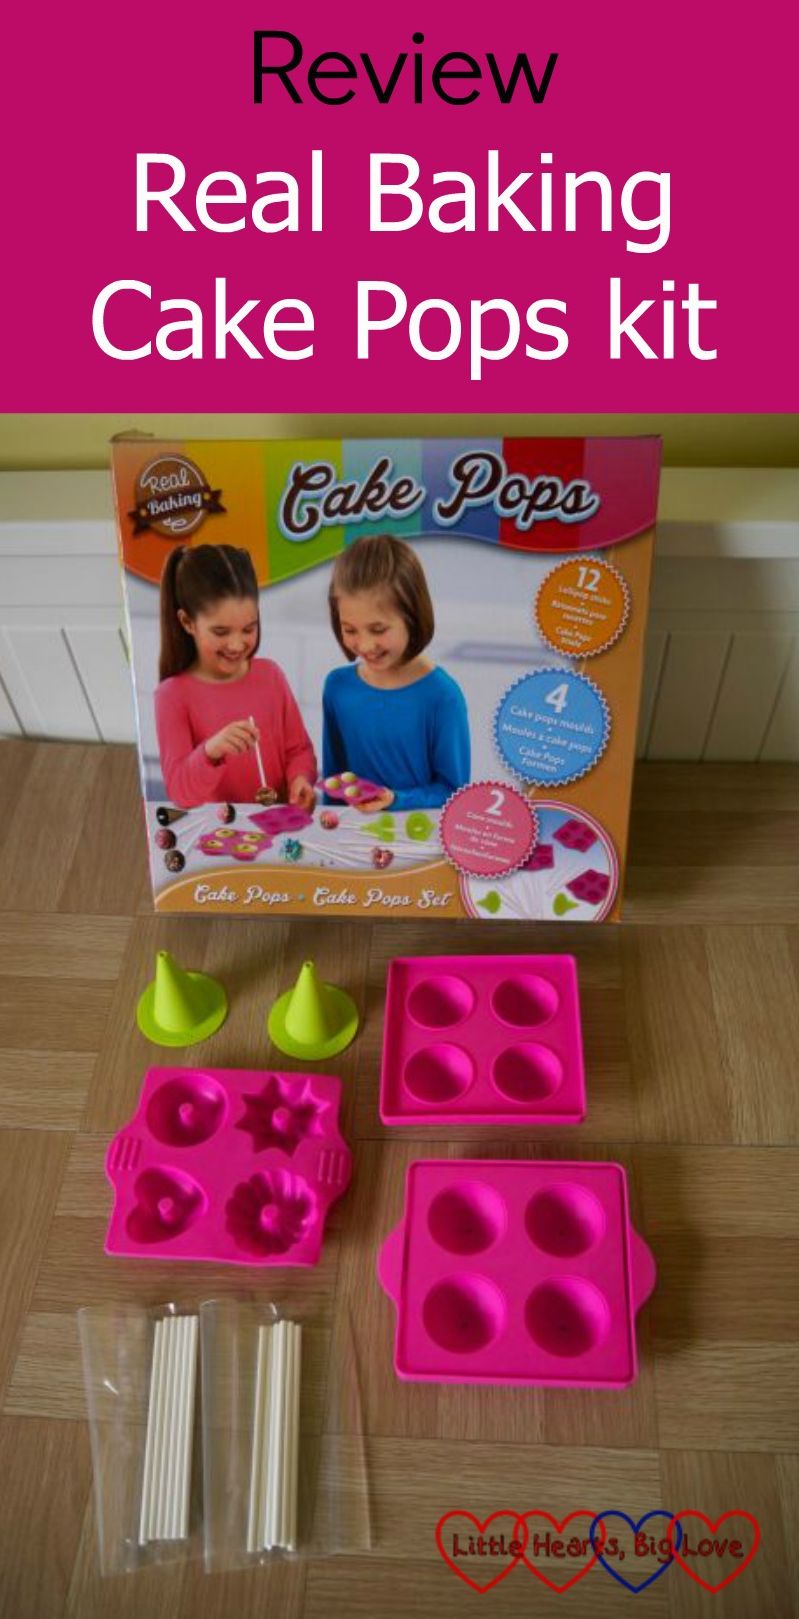 The Real Baking Cake Pops kit from Vivid - including moulds for four cake pops, four mini doughnut moulds, 2 cone-shaped moulds and 12 sticks